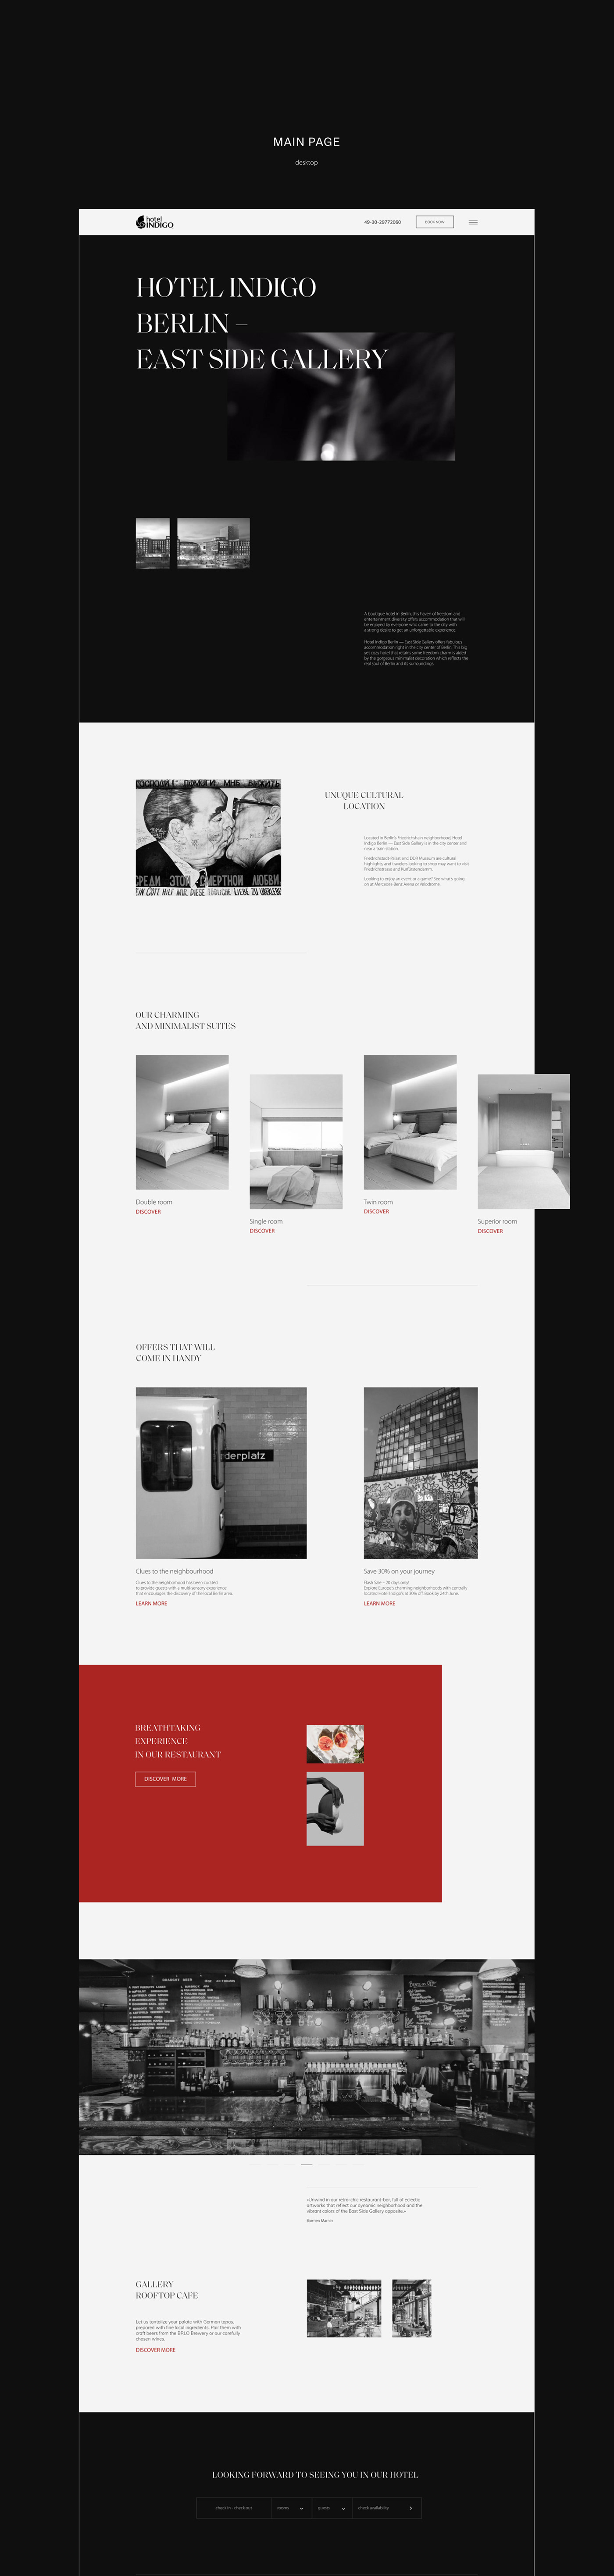 animations berlin clan hotels Interacrions modern real estate redesign uprock Webdesign